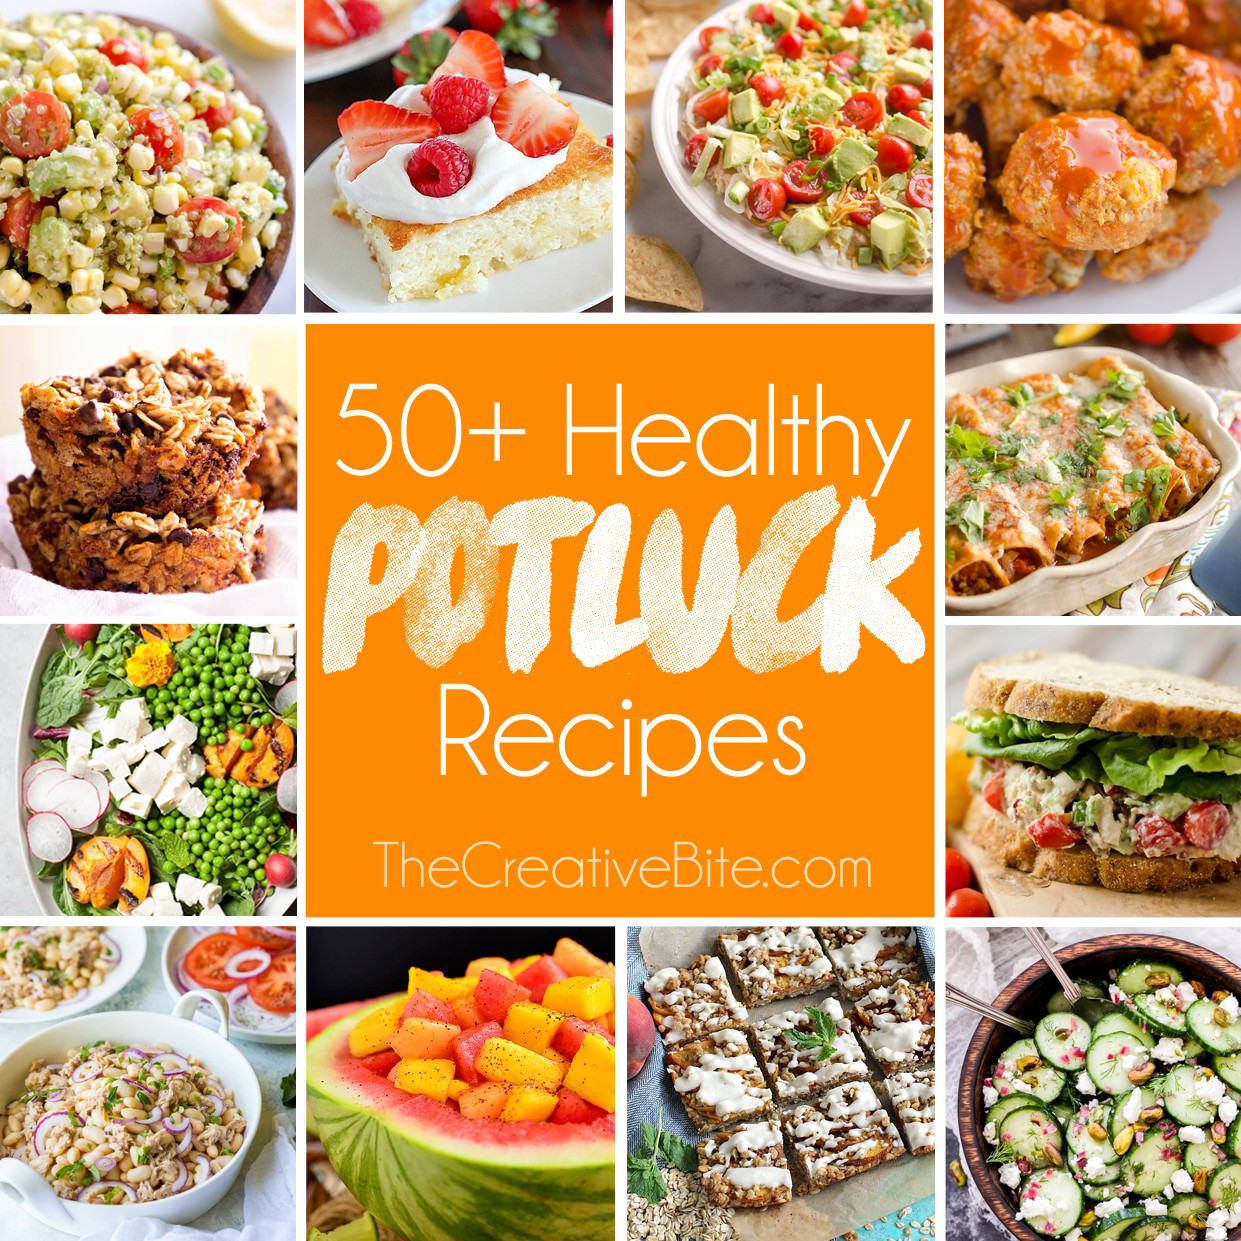 Kid Friendly Side Dishes For Potluck
 50 Light & Healthy Potluck Recipes